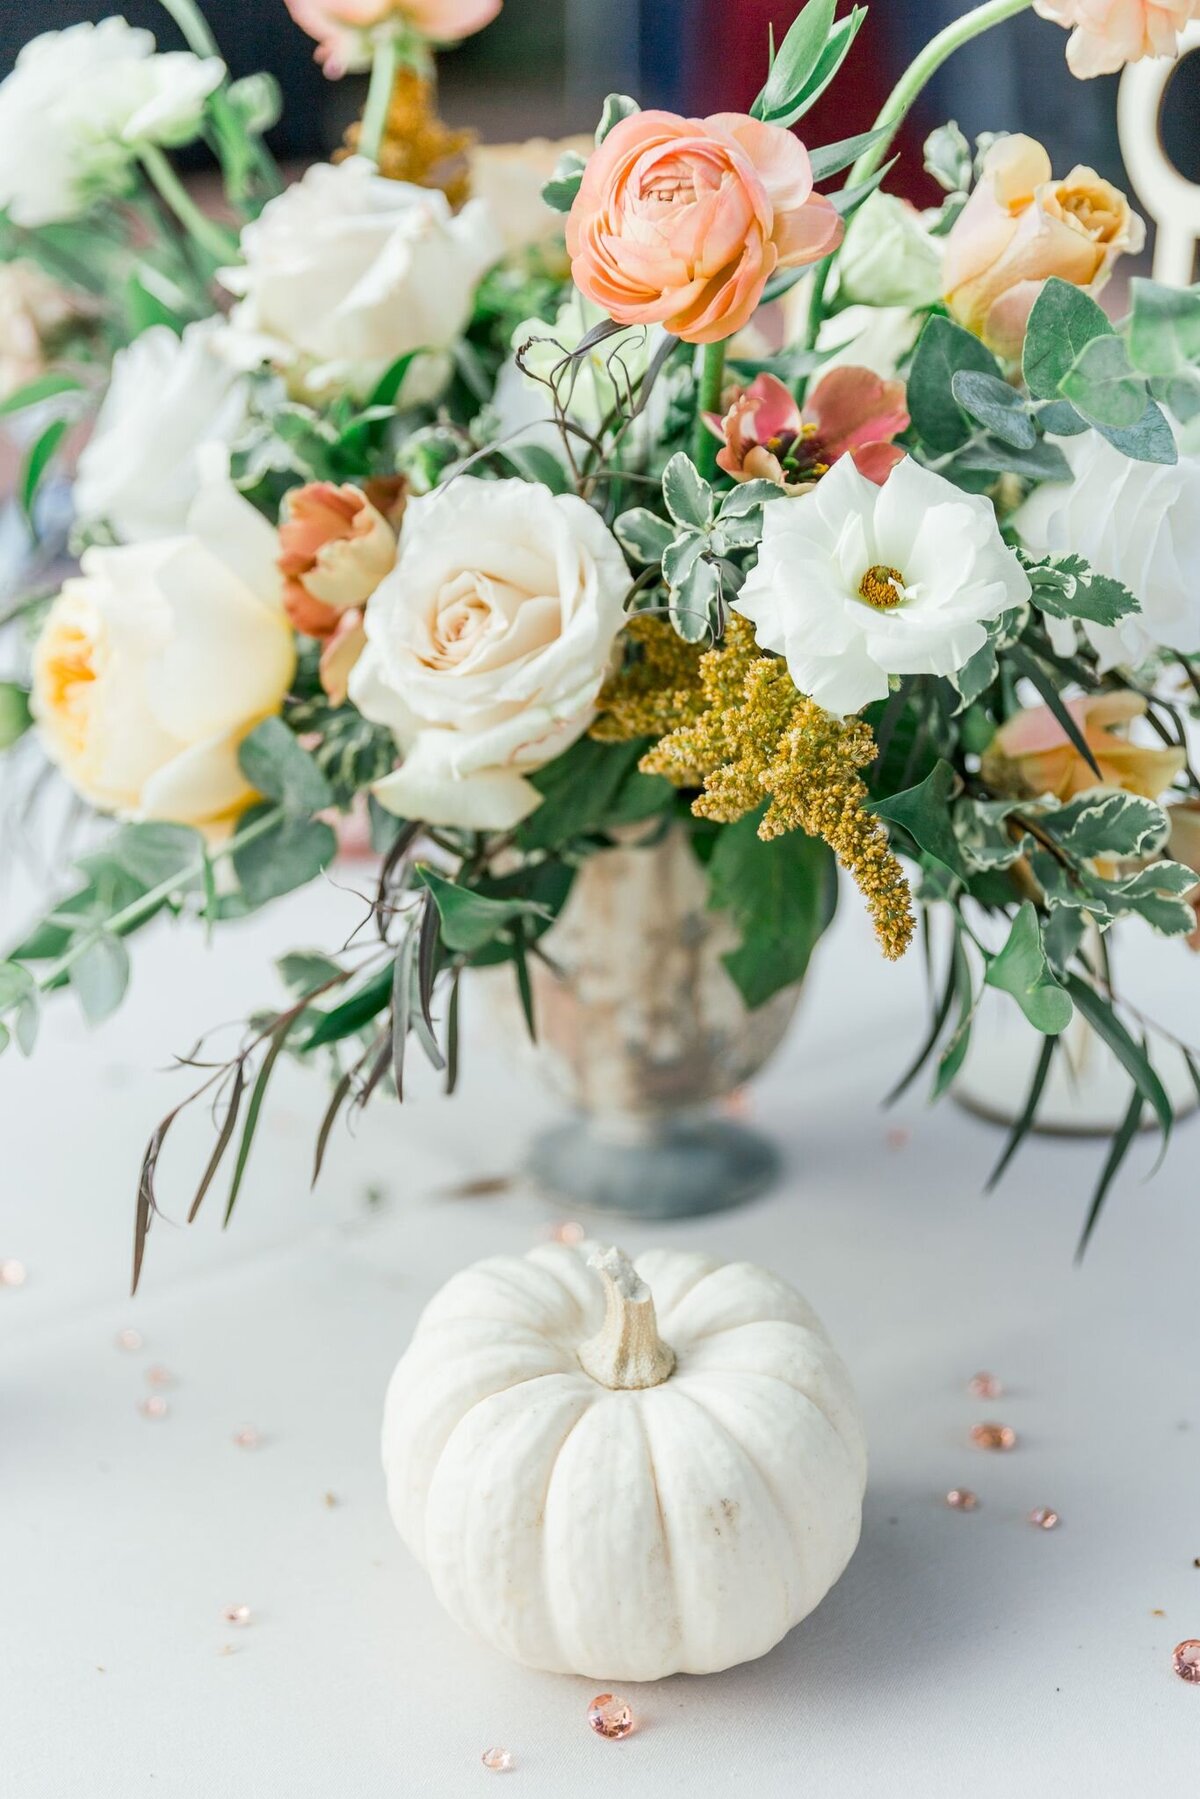 This bouquet screams fall and is placed next to a mini white pumpkin.